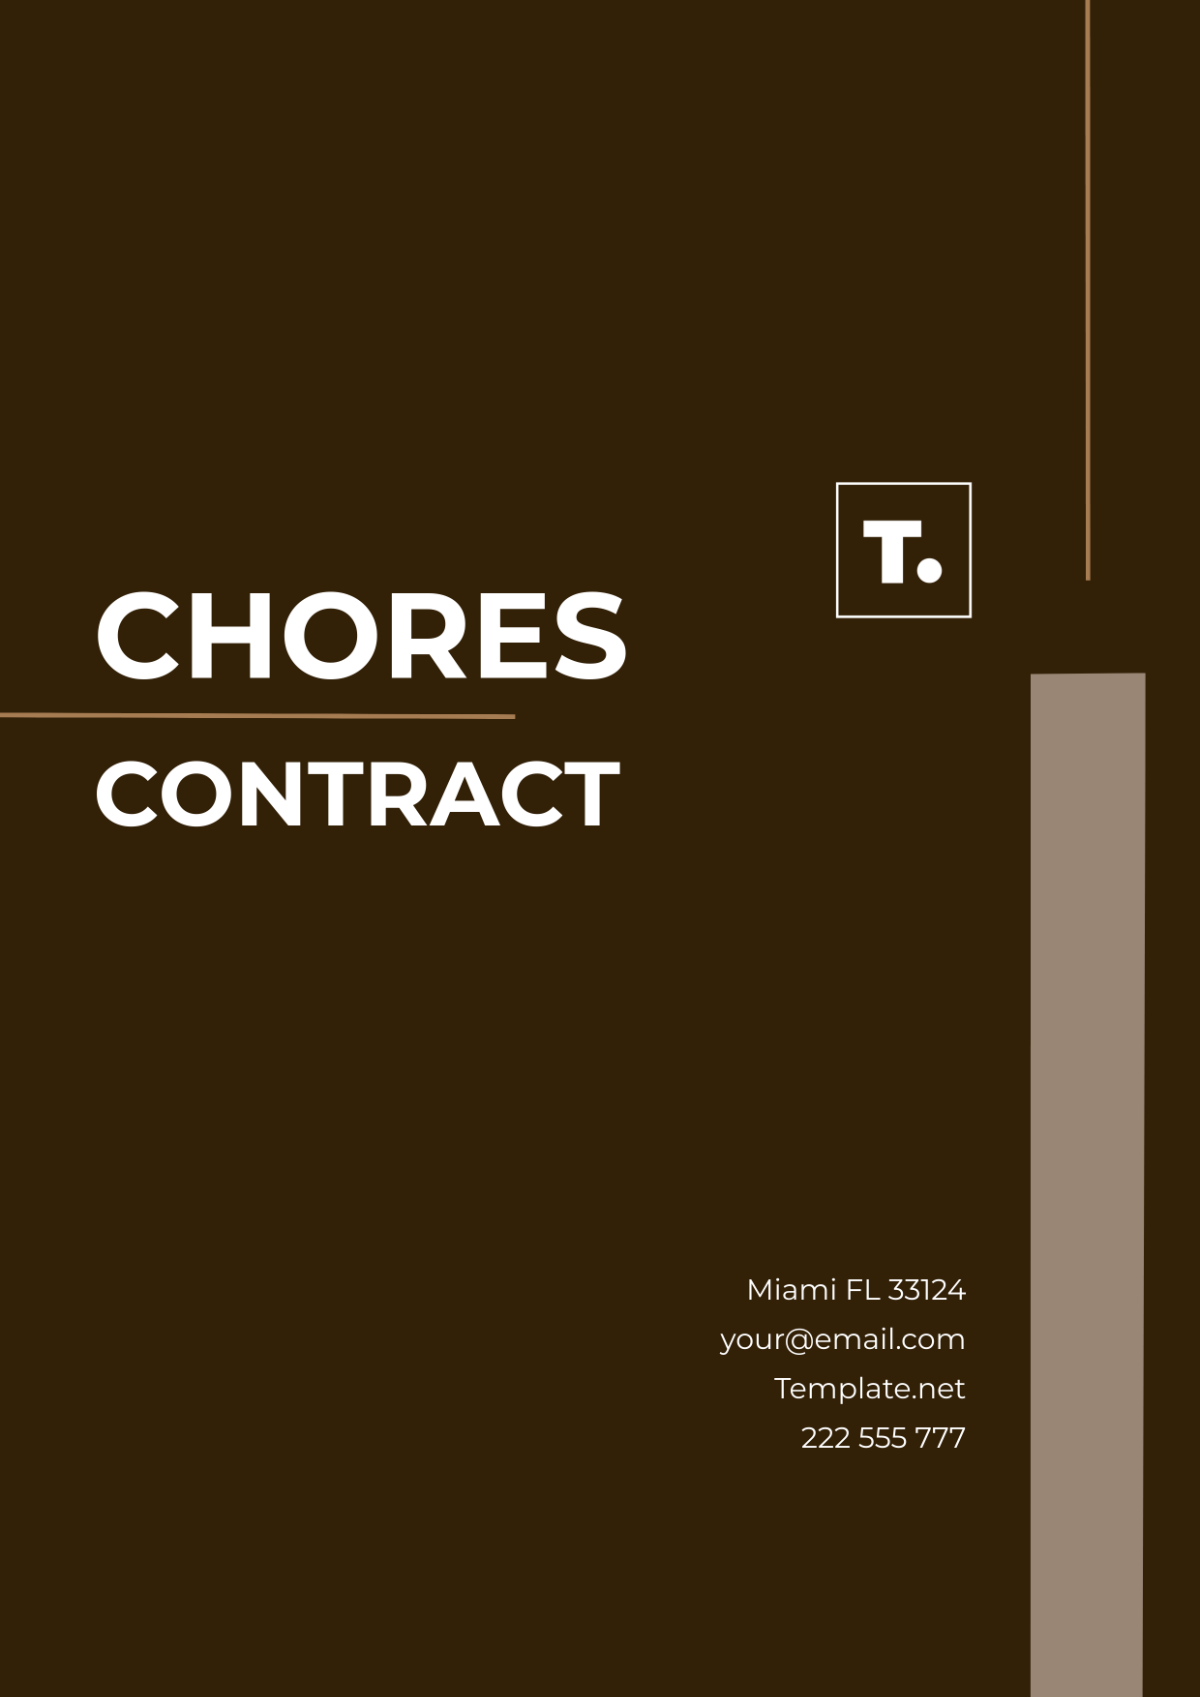 Chores Contract Template